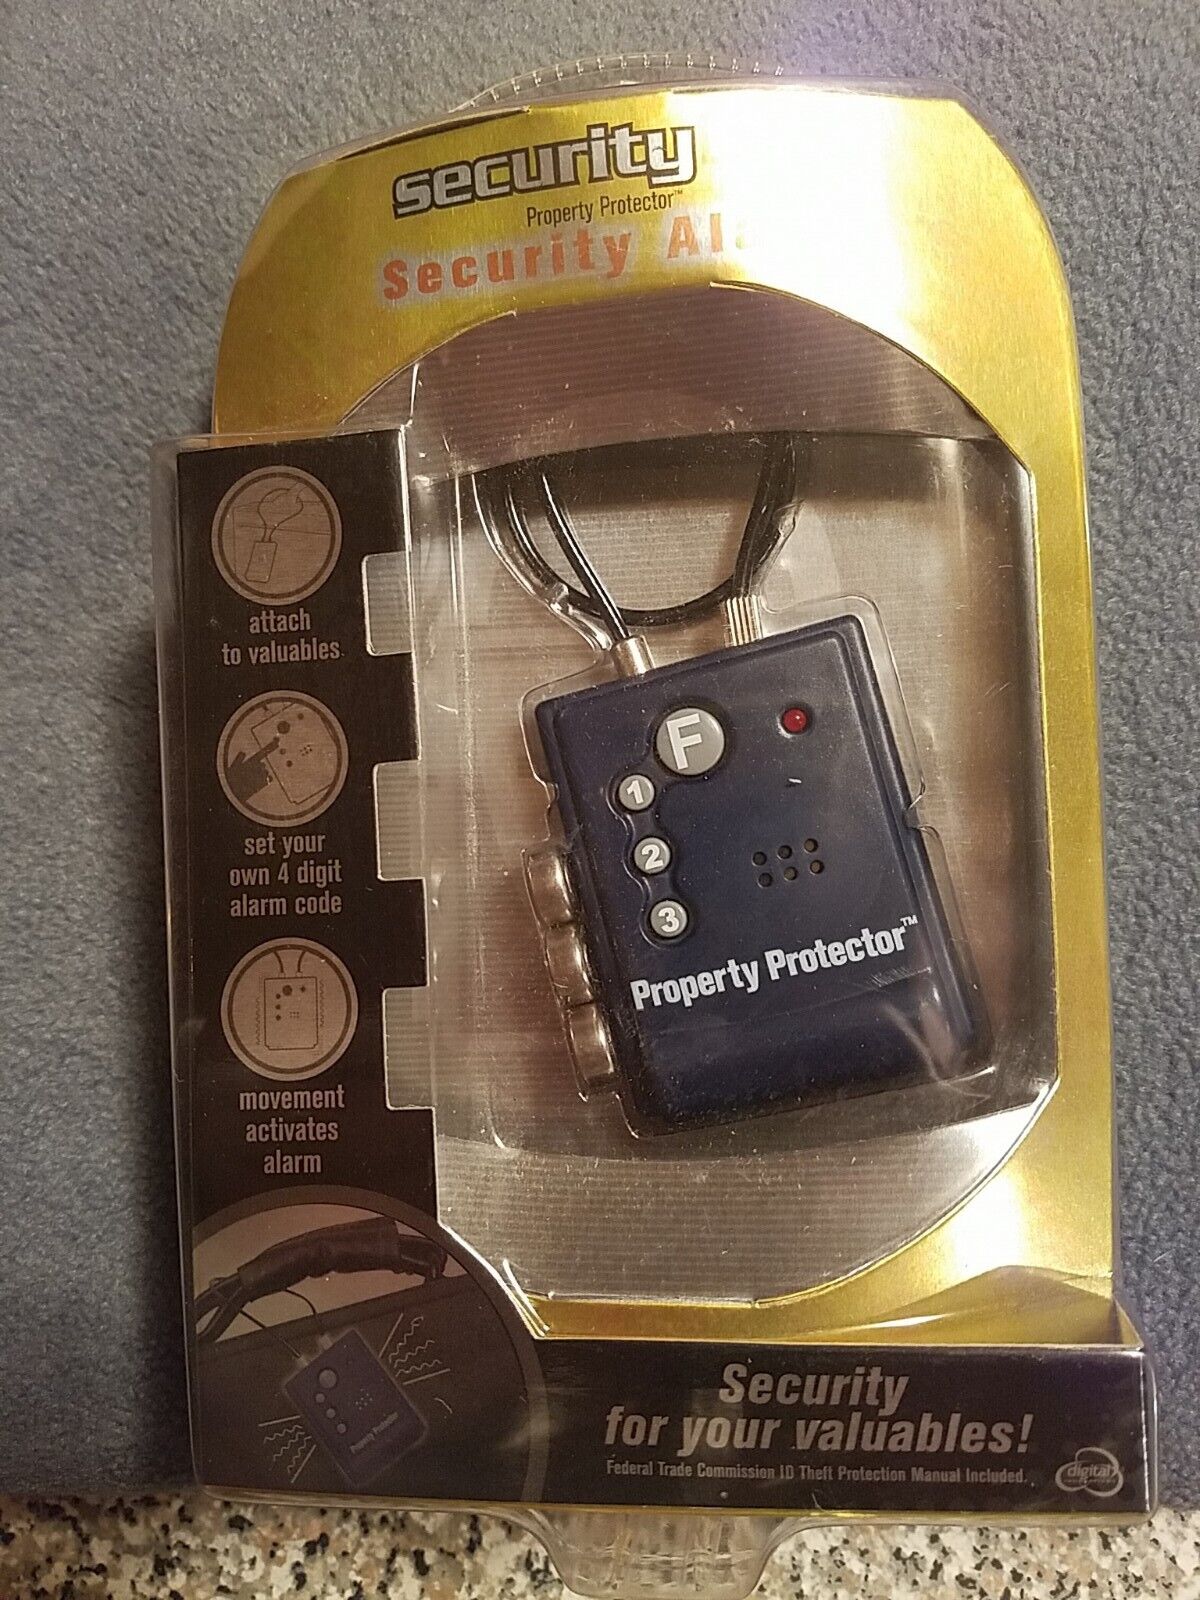 Security DR Property Protector Security Alarm New